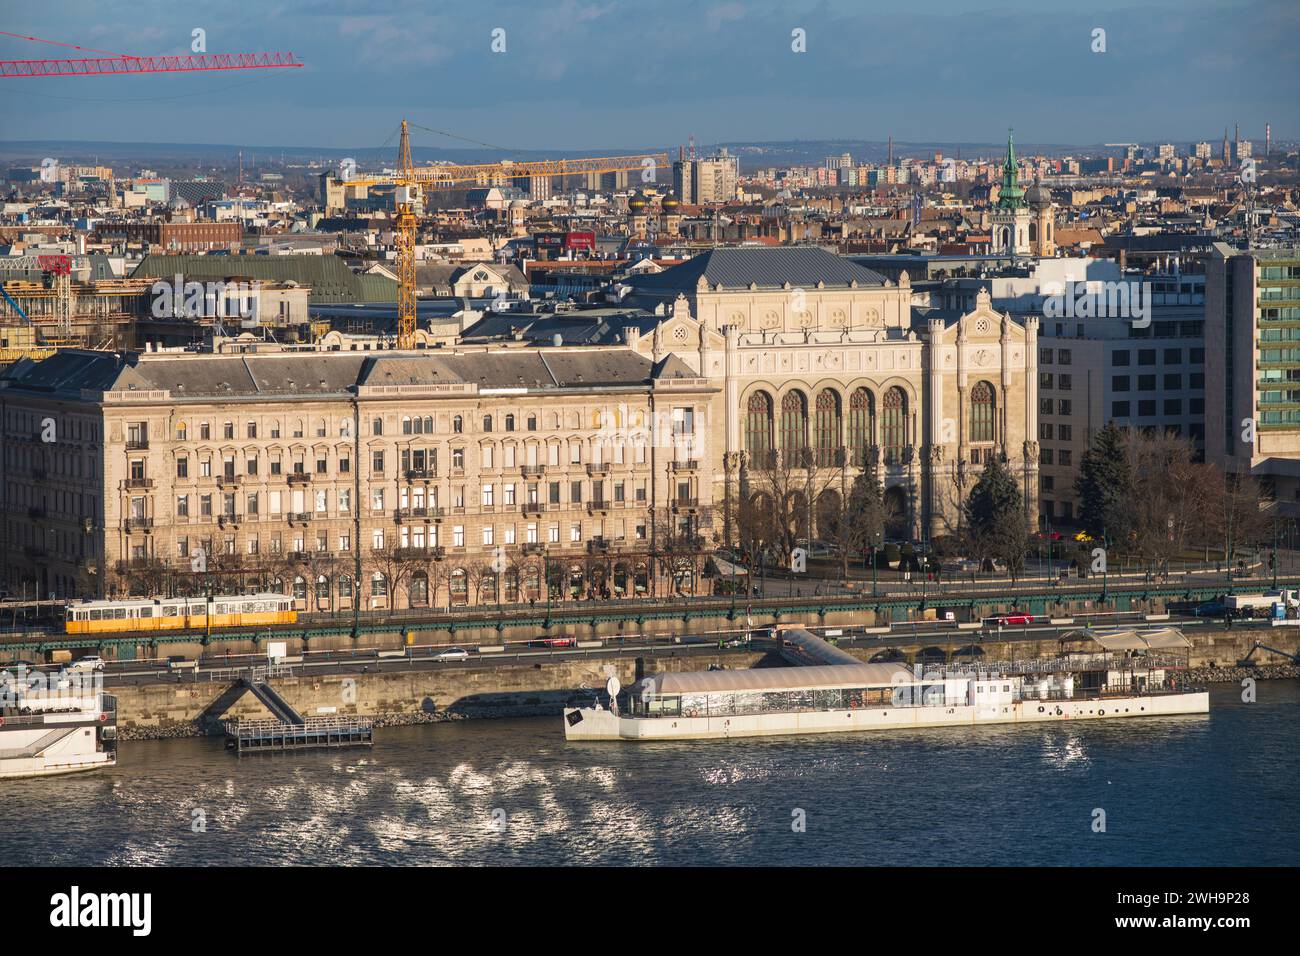 Budapest: panoramic view of the city with the Vigado Concert Hall and Danube River. Hungary Stock Photo